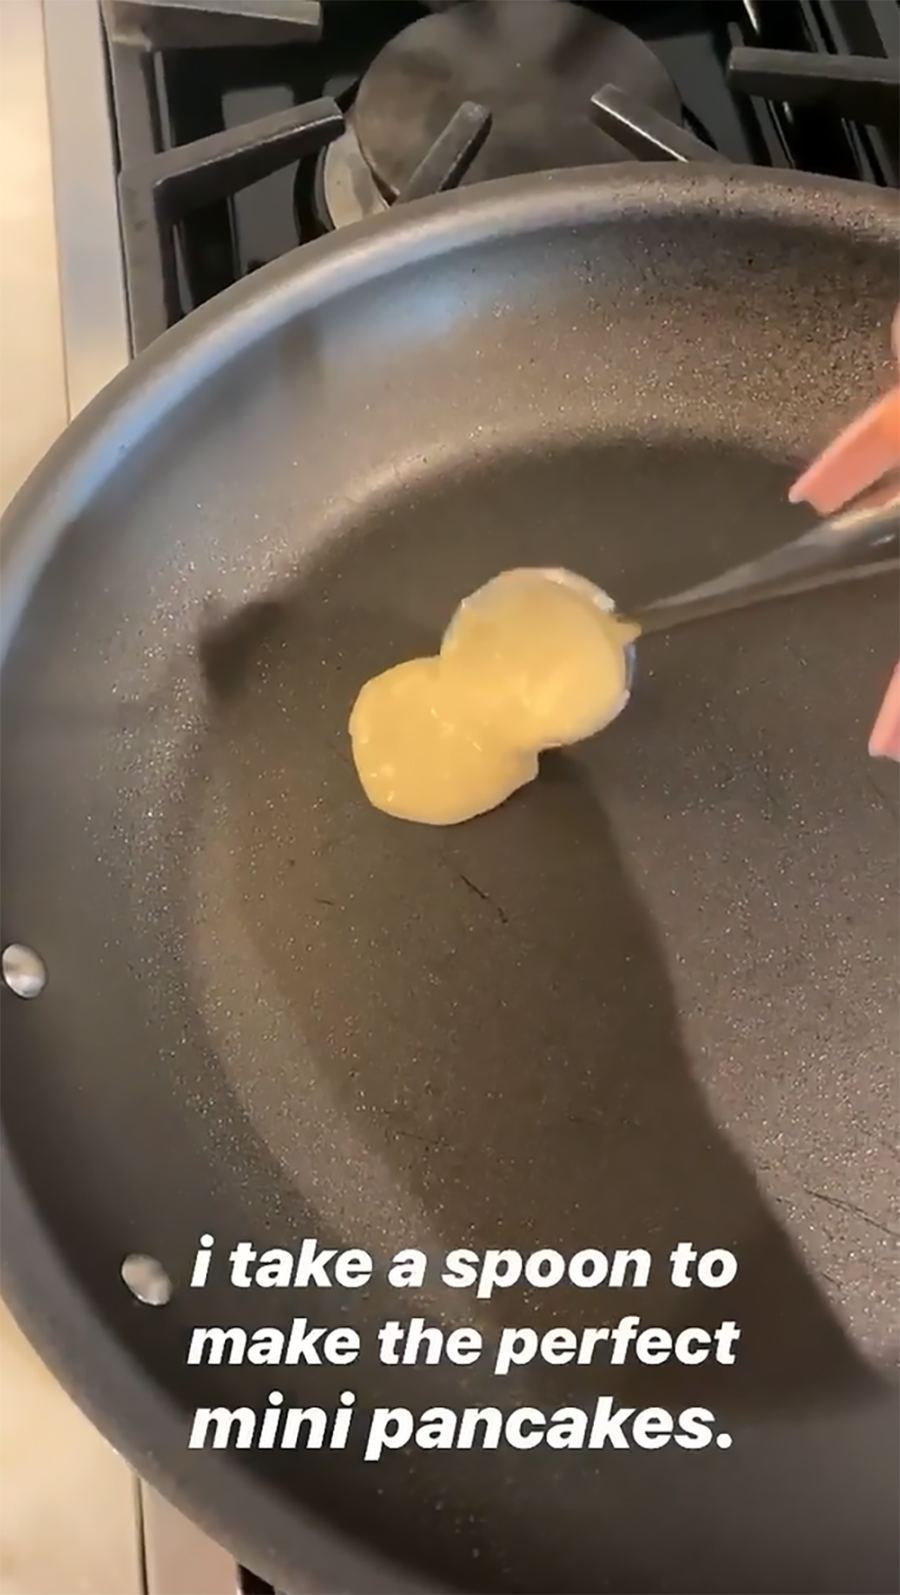 Kylie Jenner Shares the Recipe for Her 'Perfect Mini Pancakes’